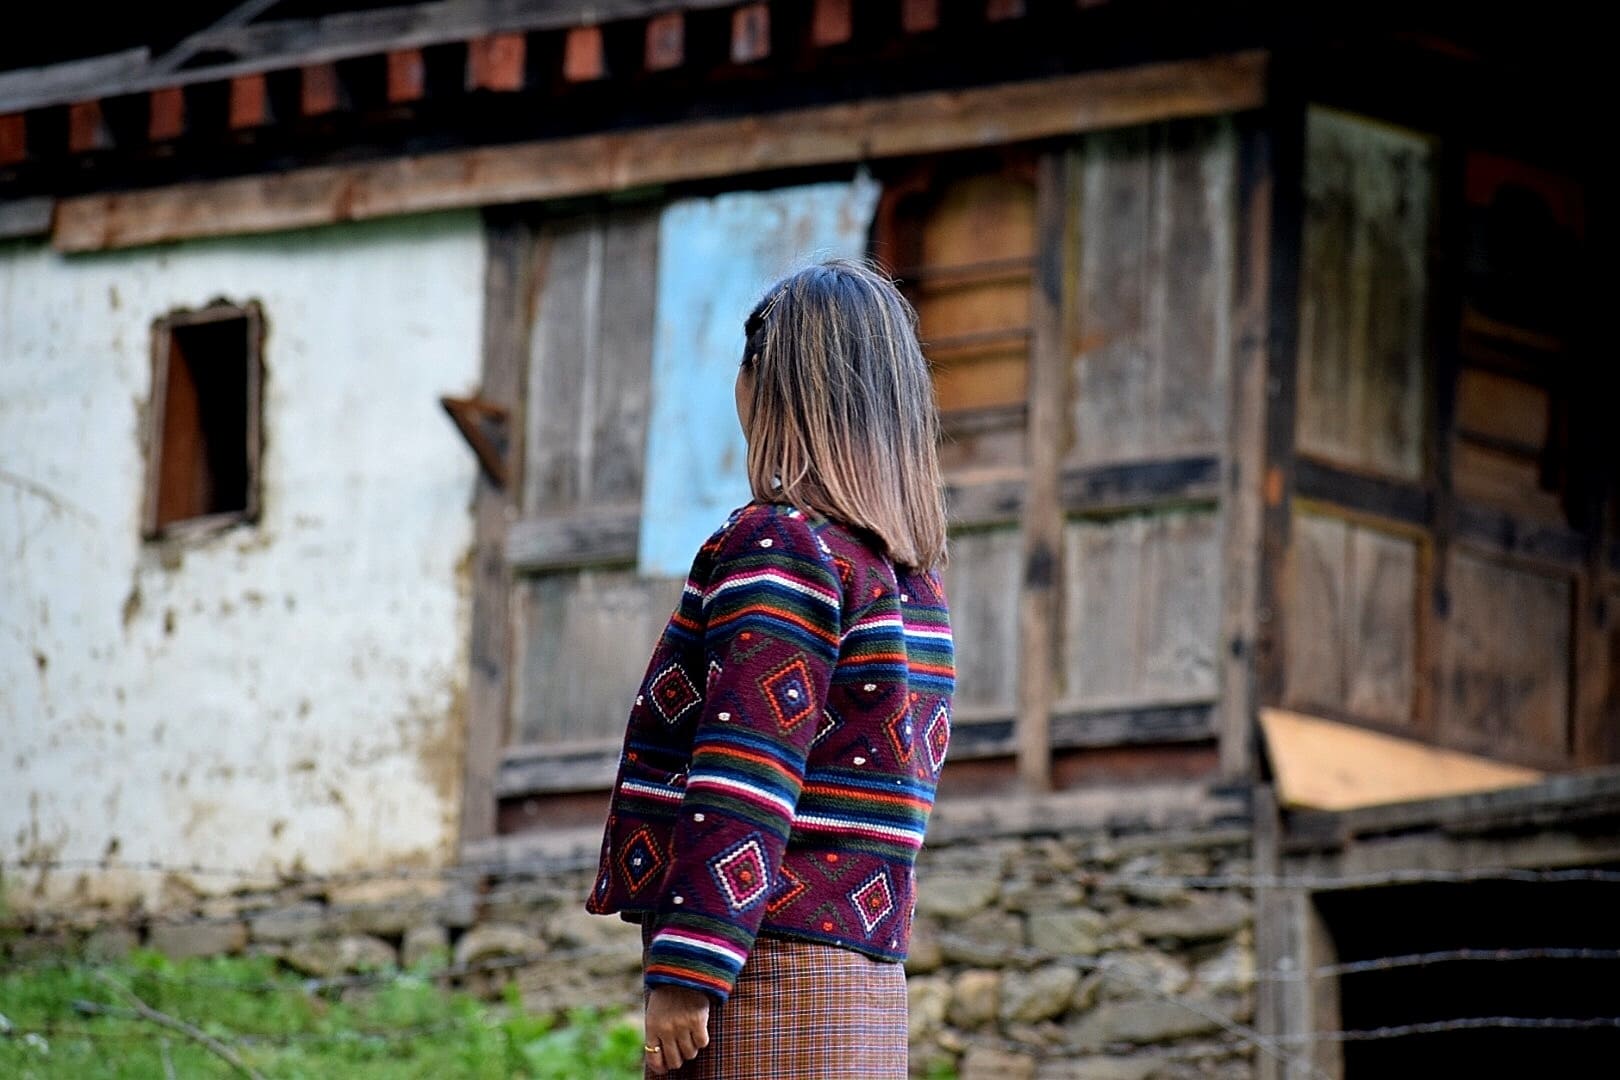 Woman turned away from the camera wearing a traditional Bhutanese weaving jacket